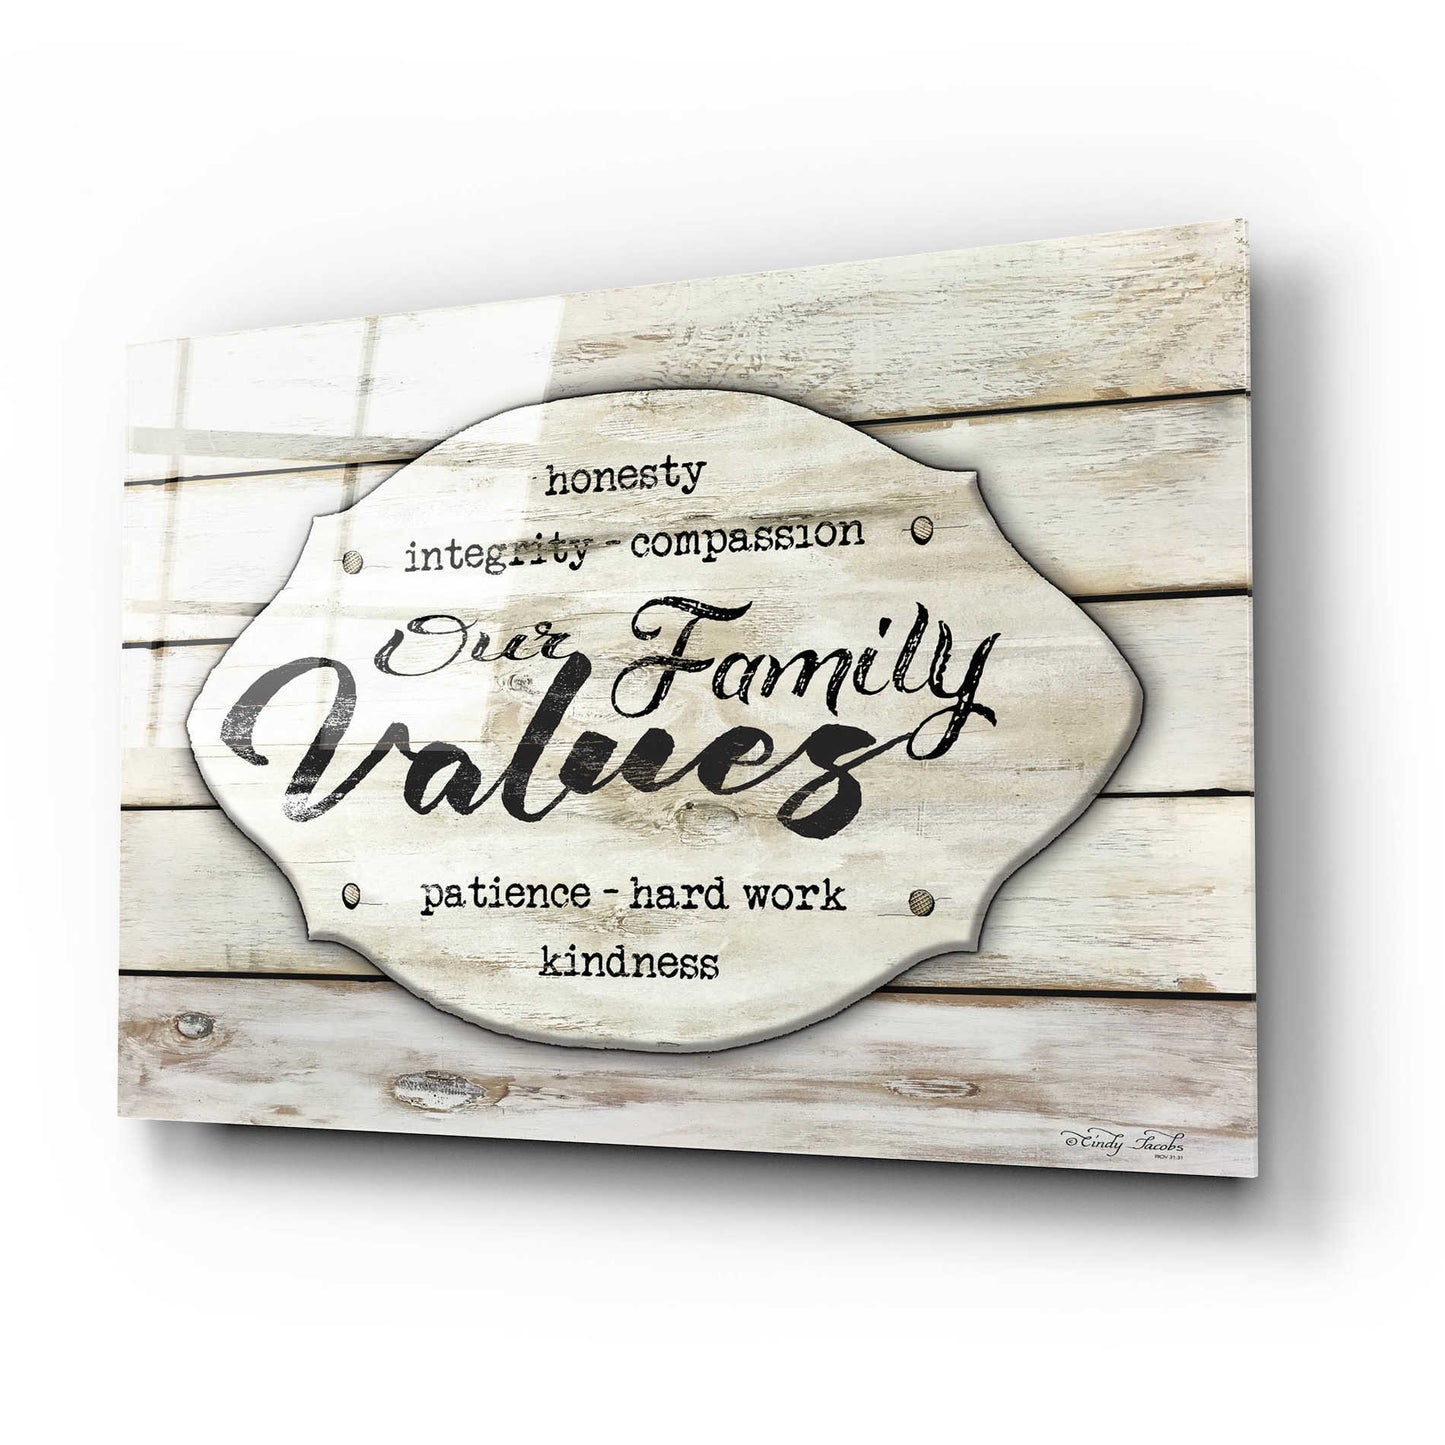 Epic Art 'Our Family Values' by Cindy Jacobs, Acrylic Glass Wall Art,24x16